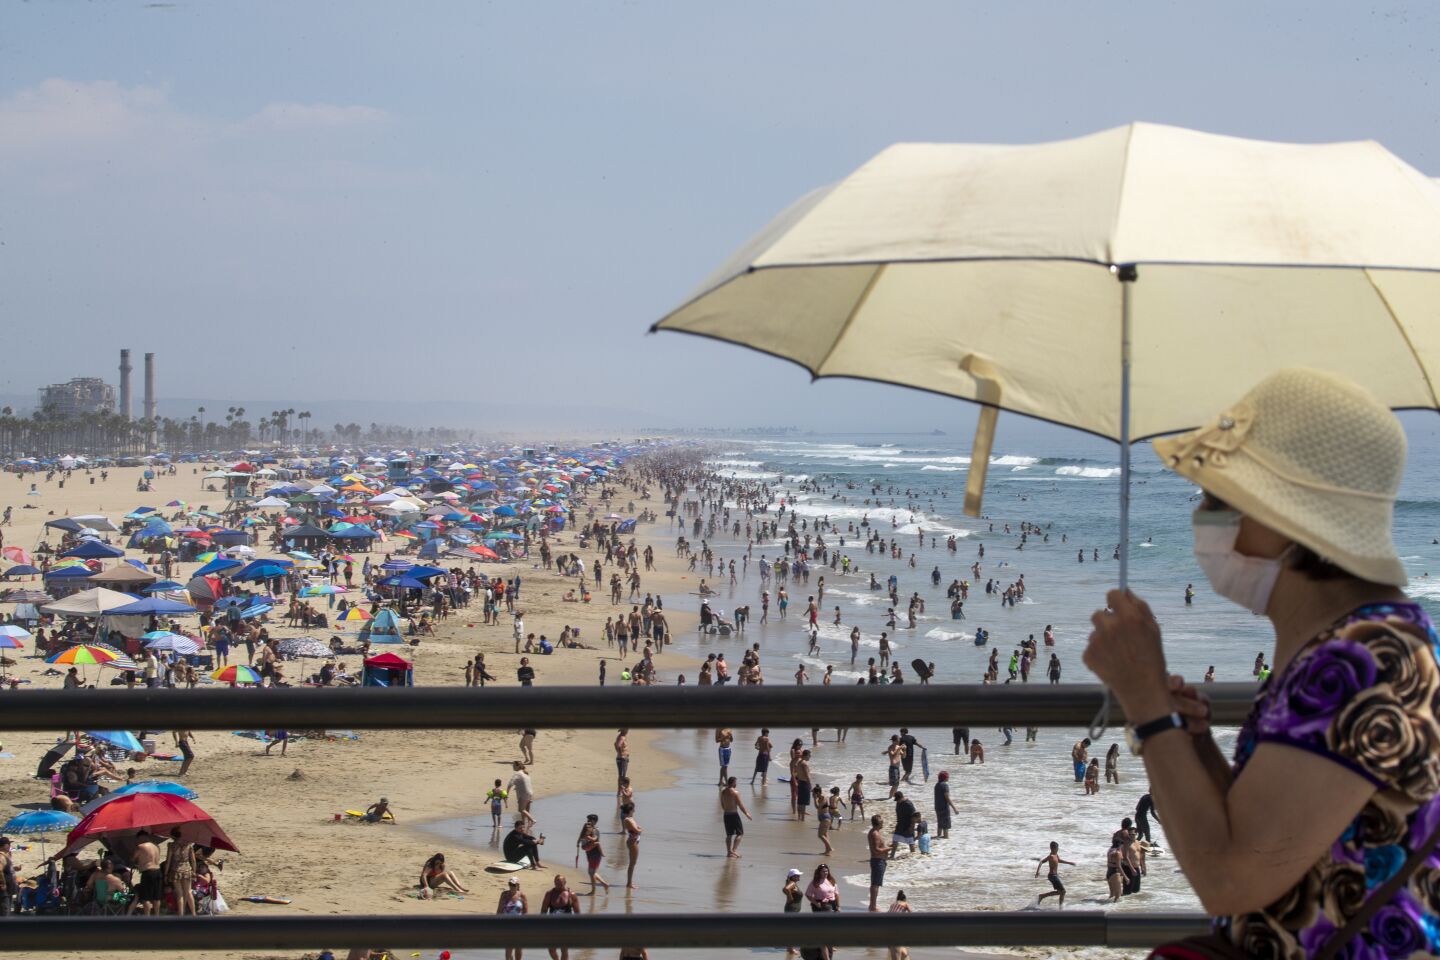 Yolanda Soria of Glendale looks out over thousands of people at Huntington Beach on Sunday.